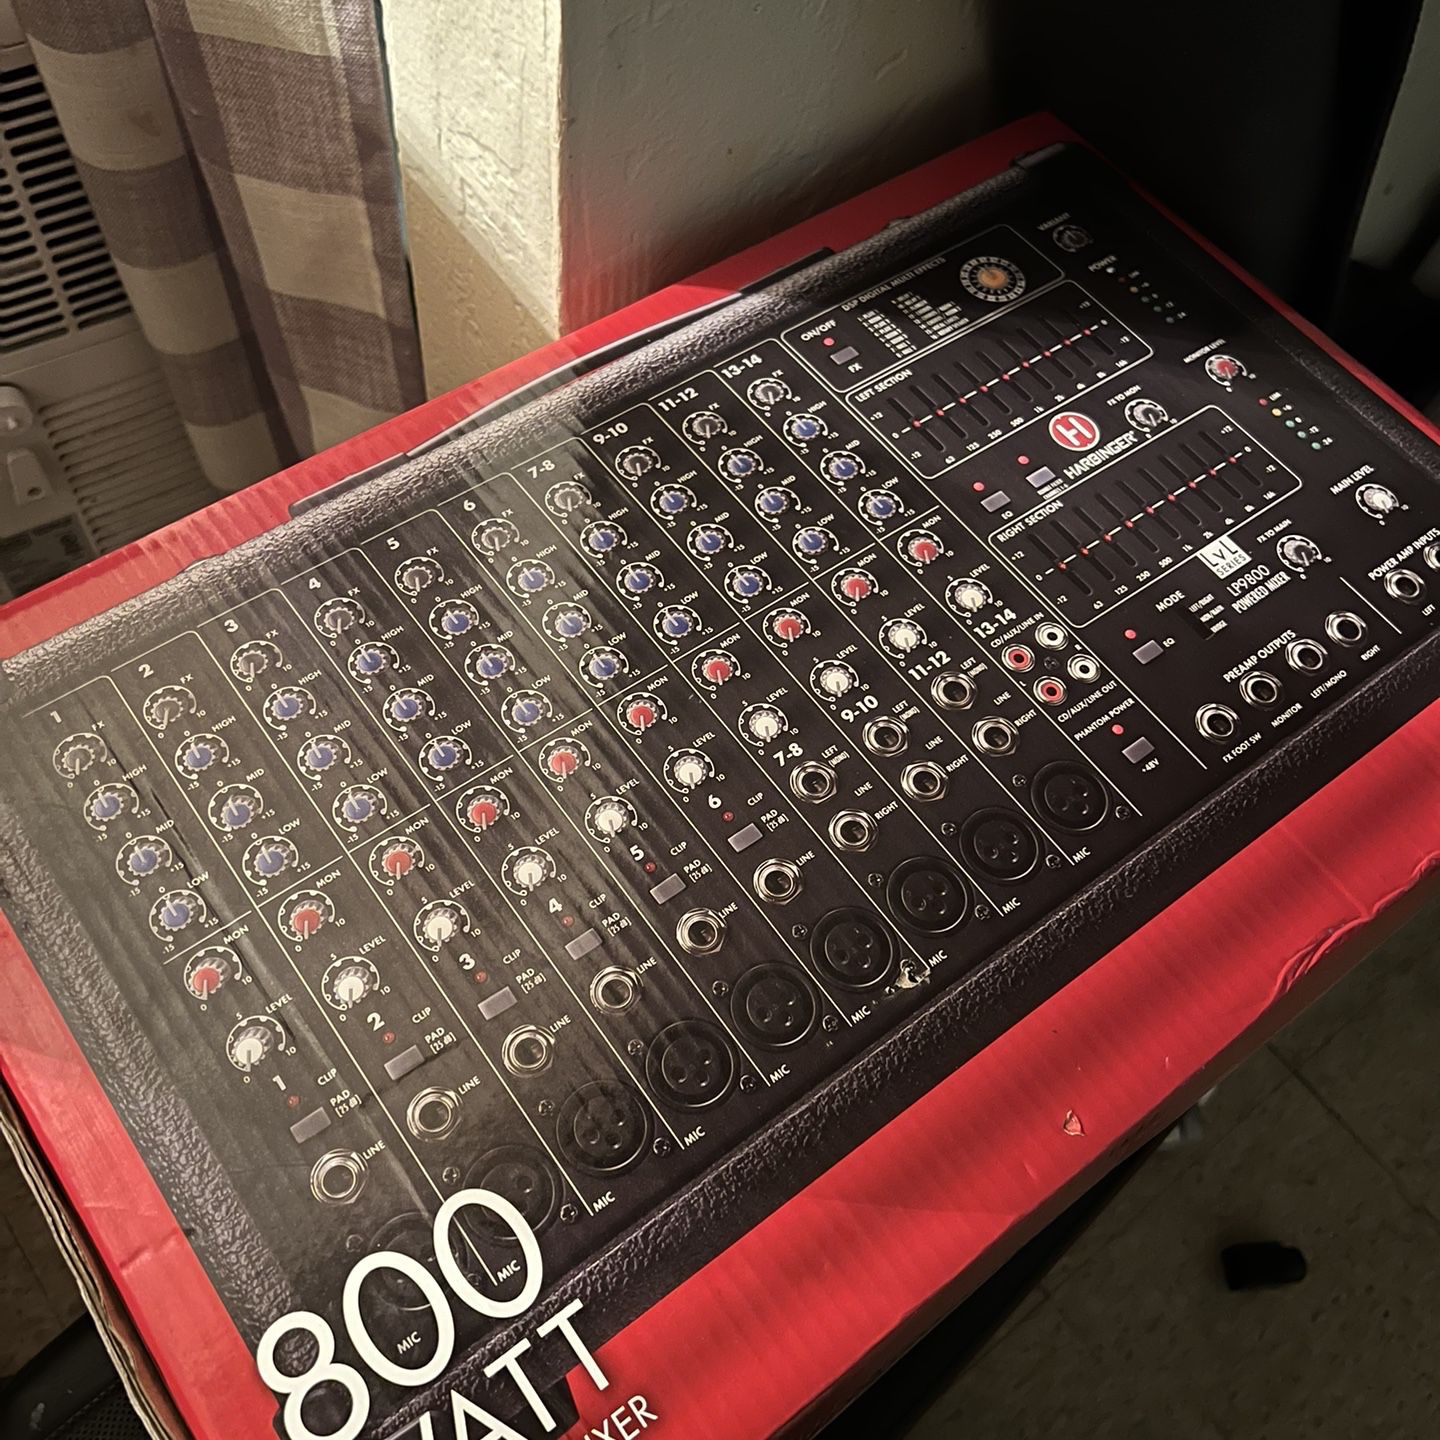 Harbinger LP9800 powered mixer for Sale in Federal Way, WA - OfferUp